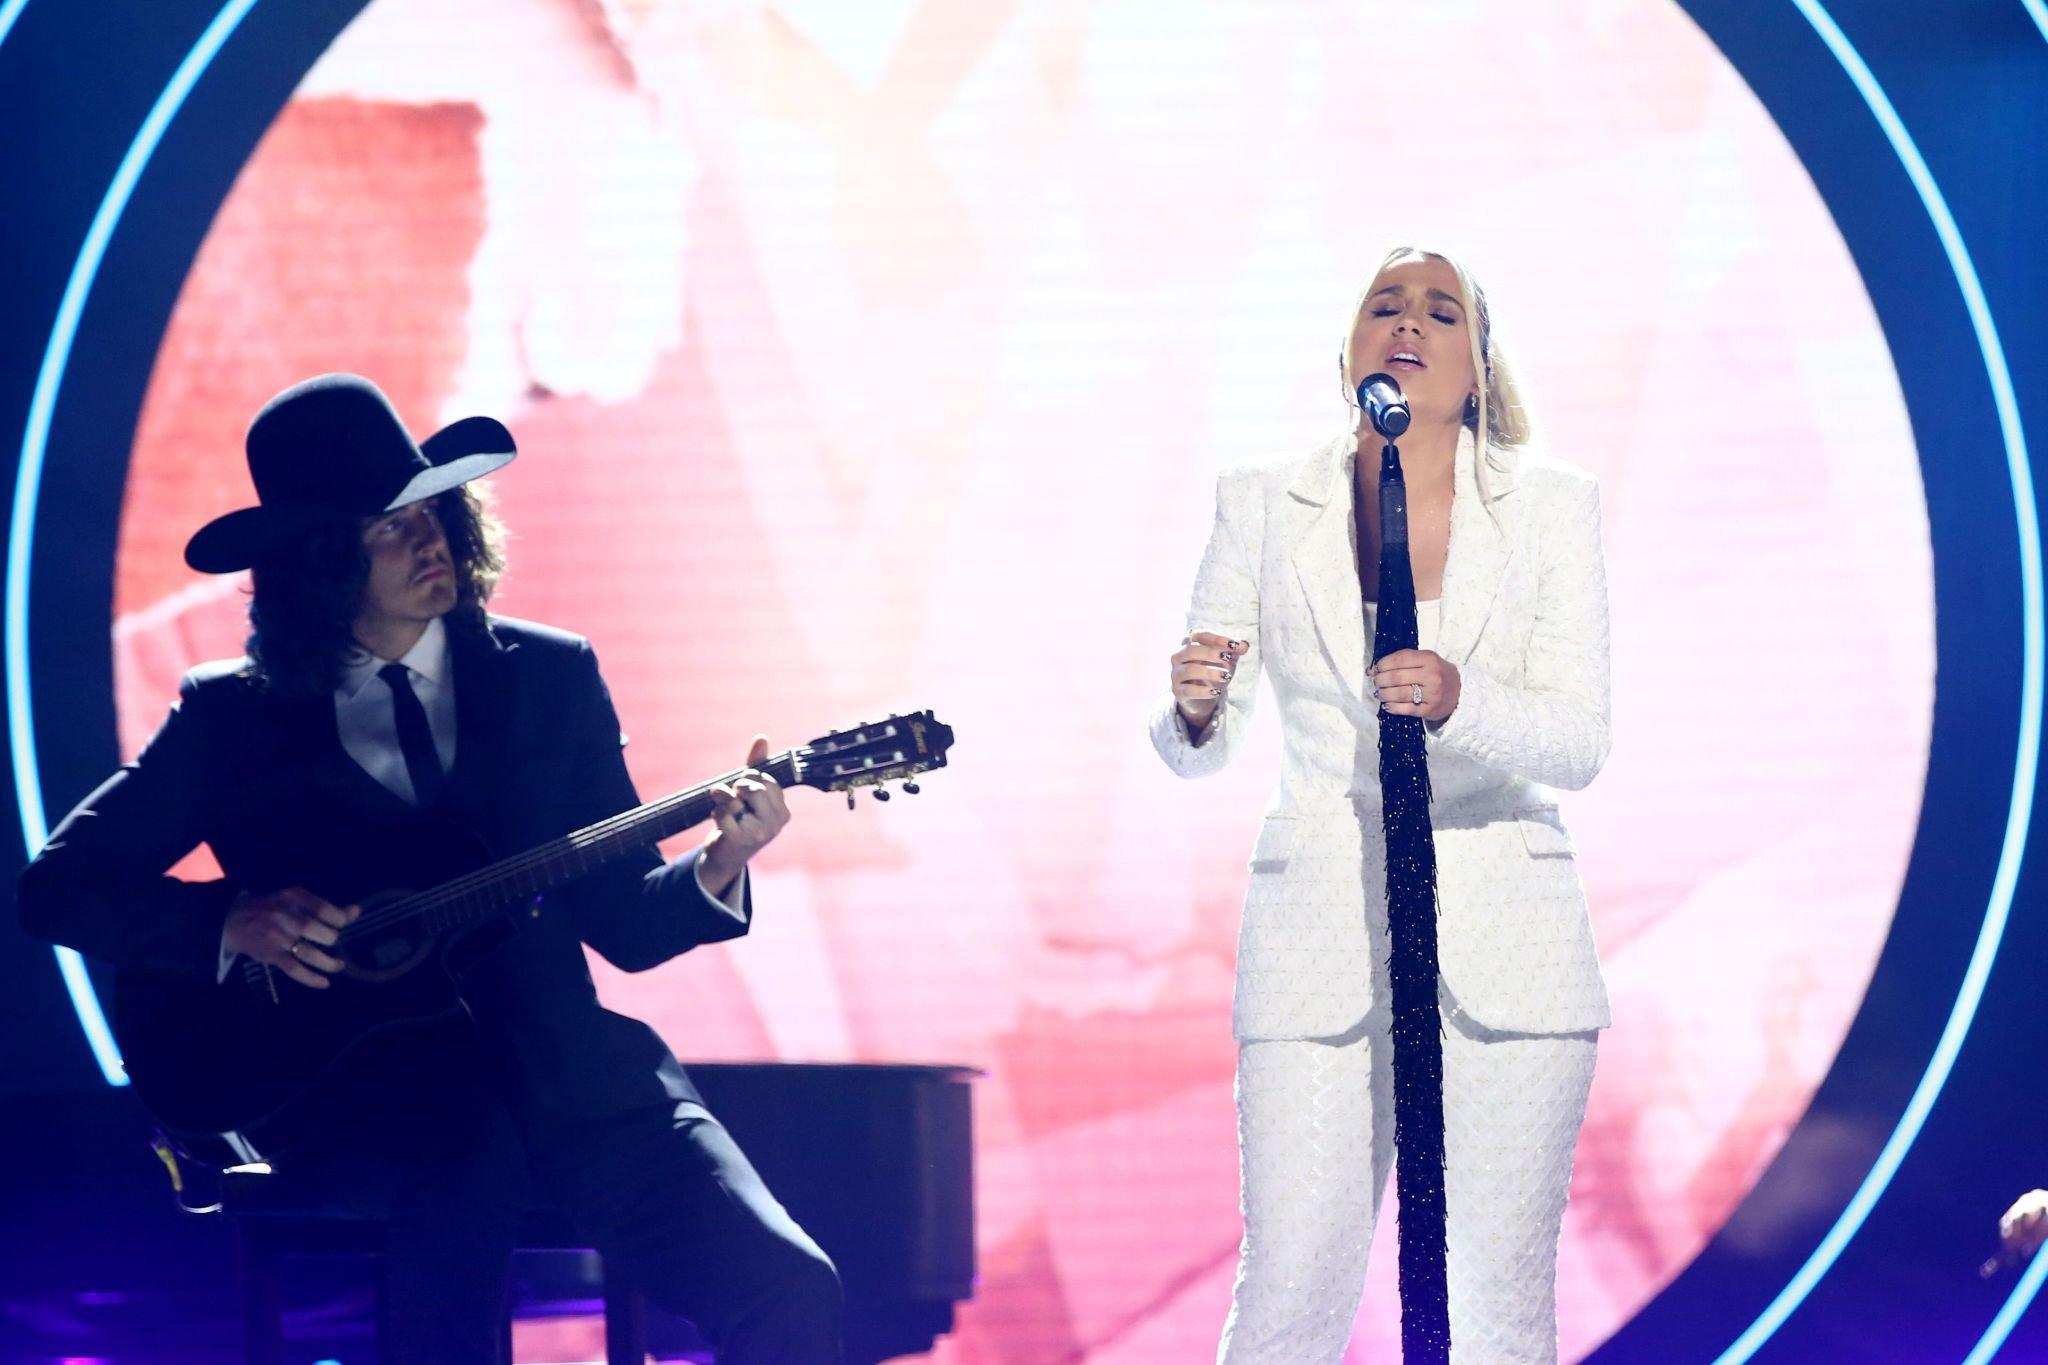 2021 CMT Artists Of The Year honoree Gabby Barrett performing "The Good Ones" LIVE with husband Cade Foehner on guitar.
